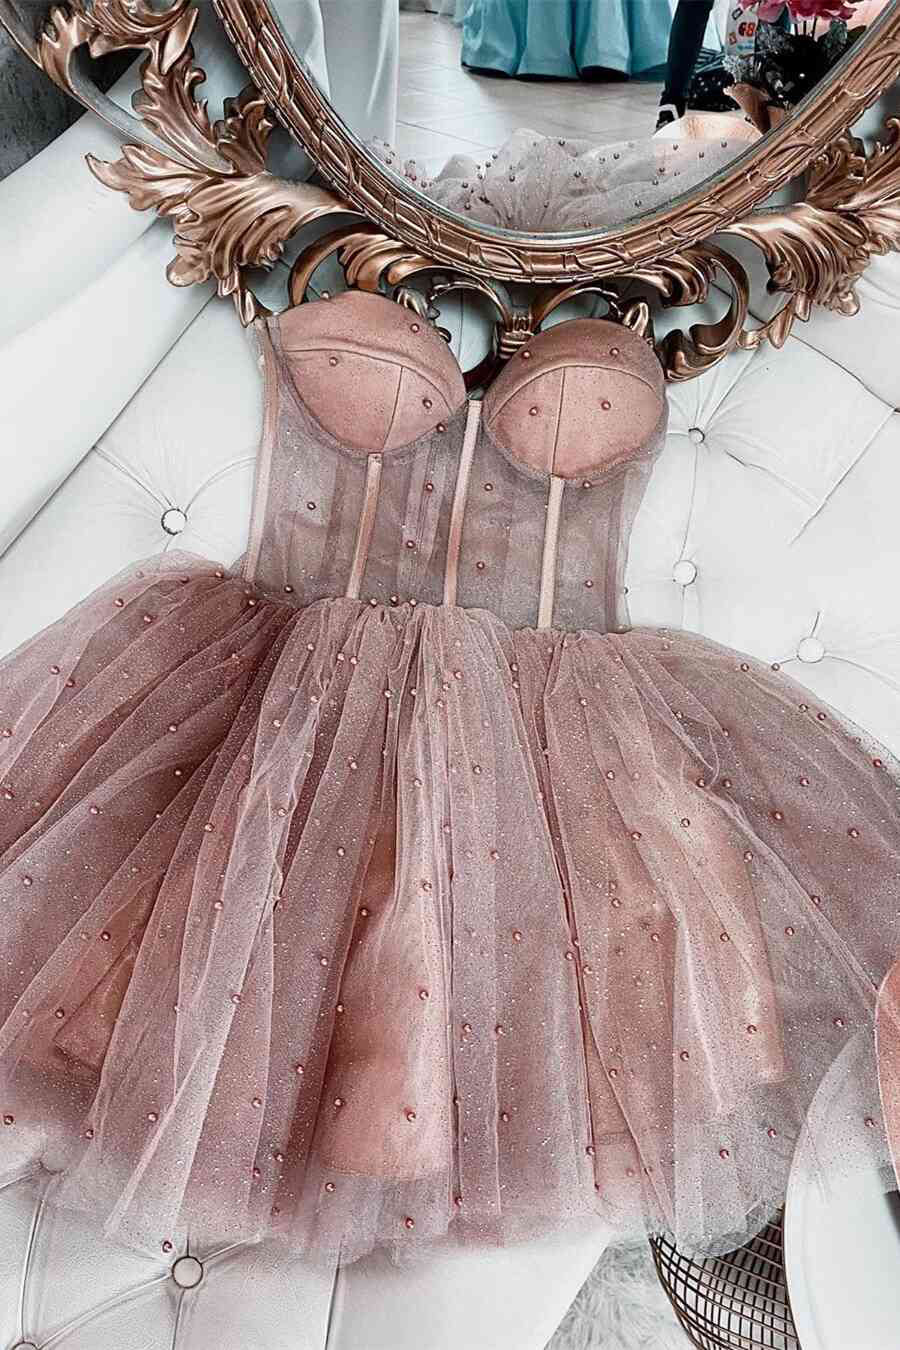 Prom Dress 3 11 Sleeves, A-line Dusty Rose Sleeveless Tulle Short Homecoming Dresses